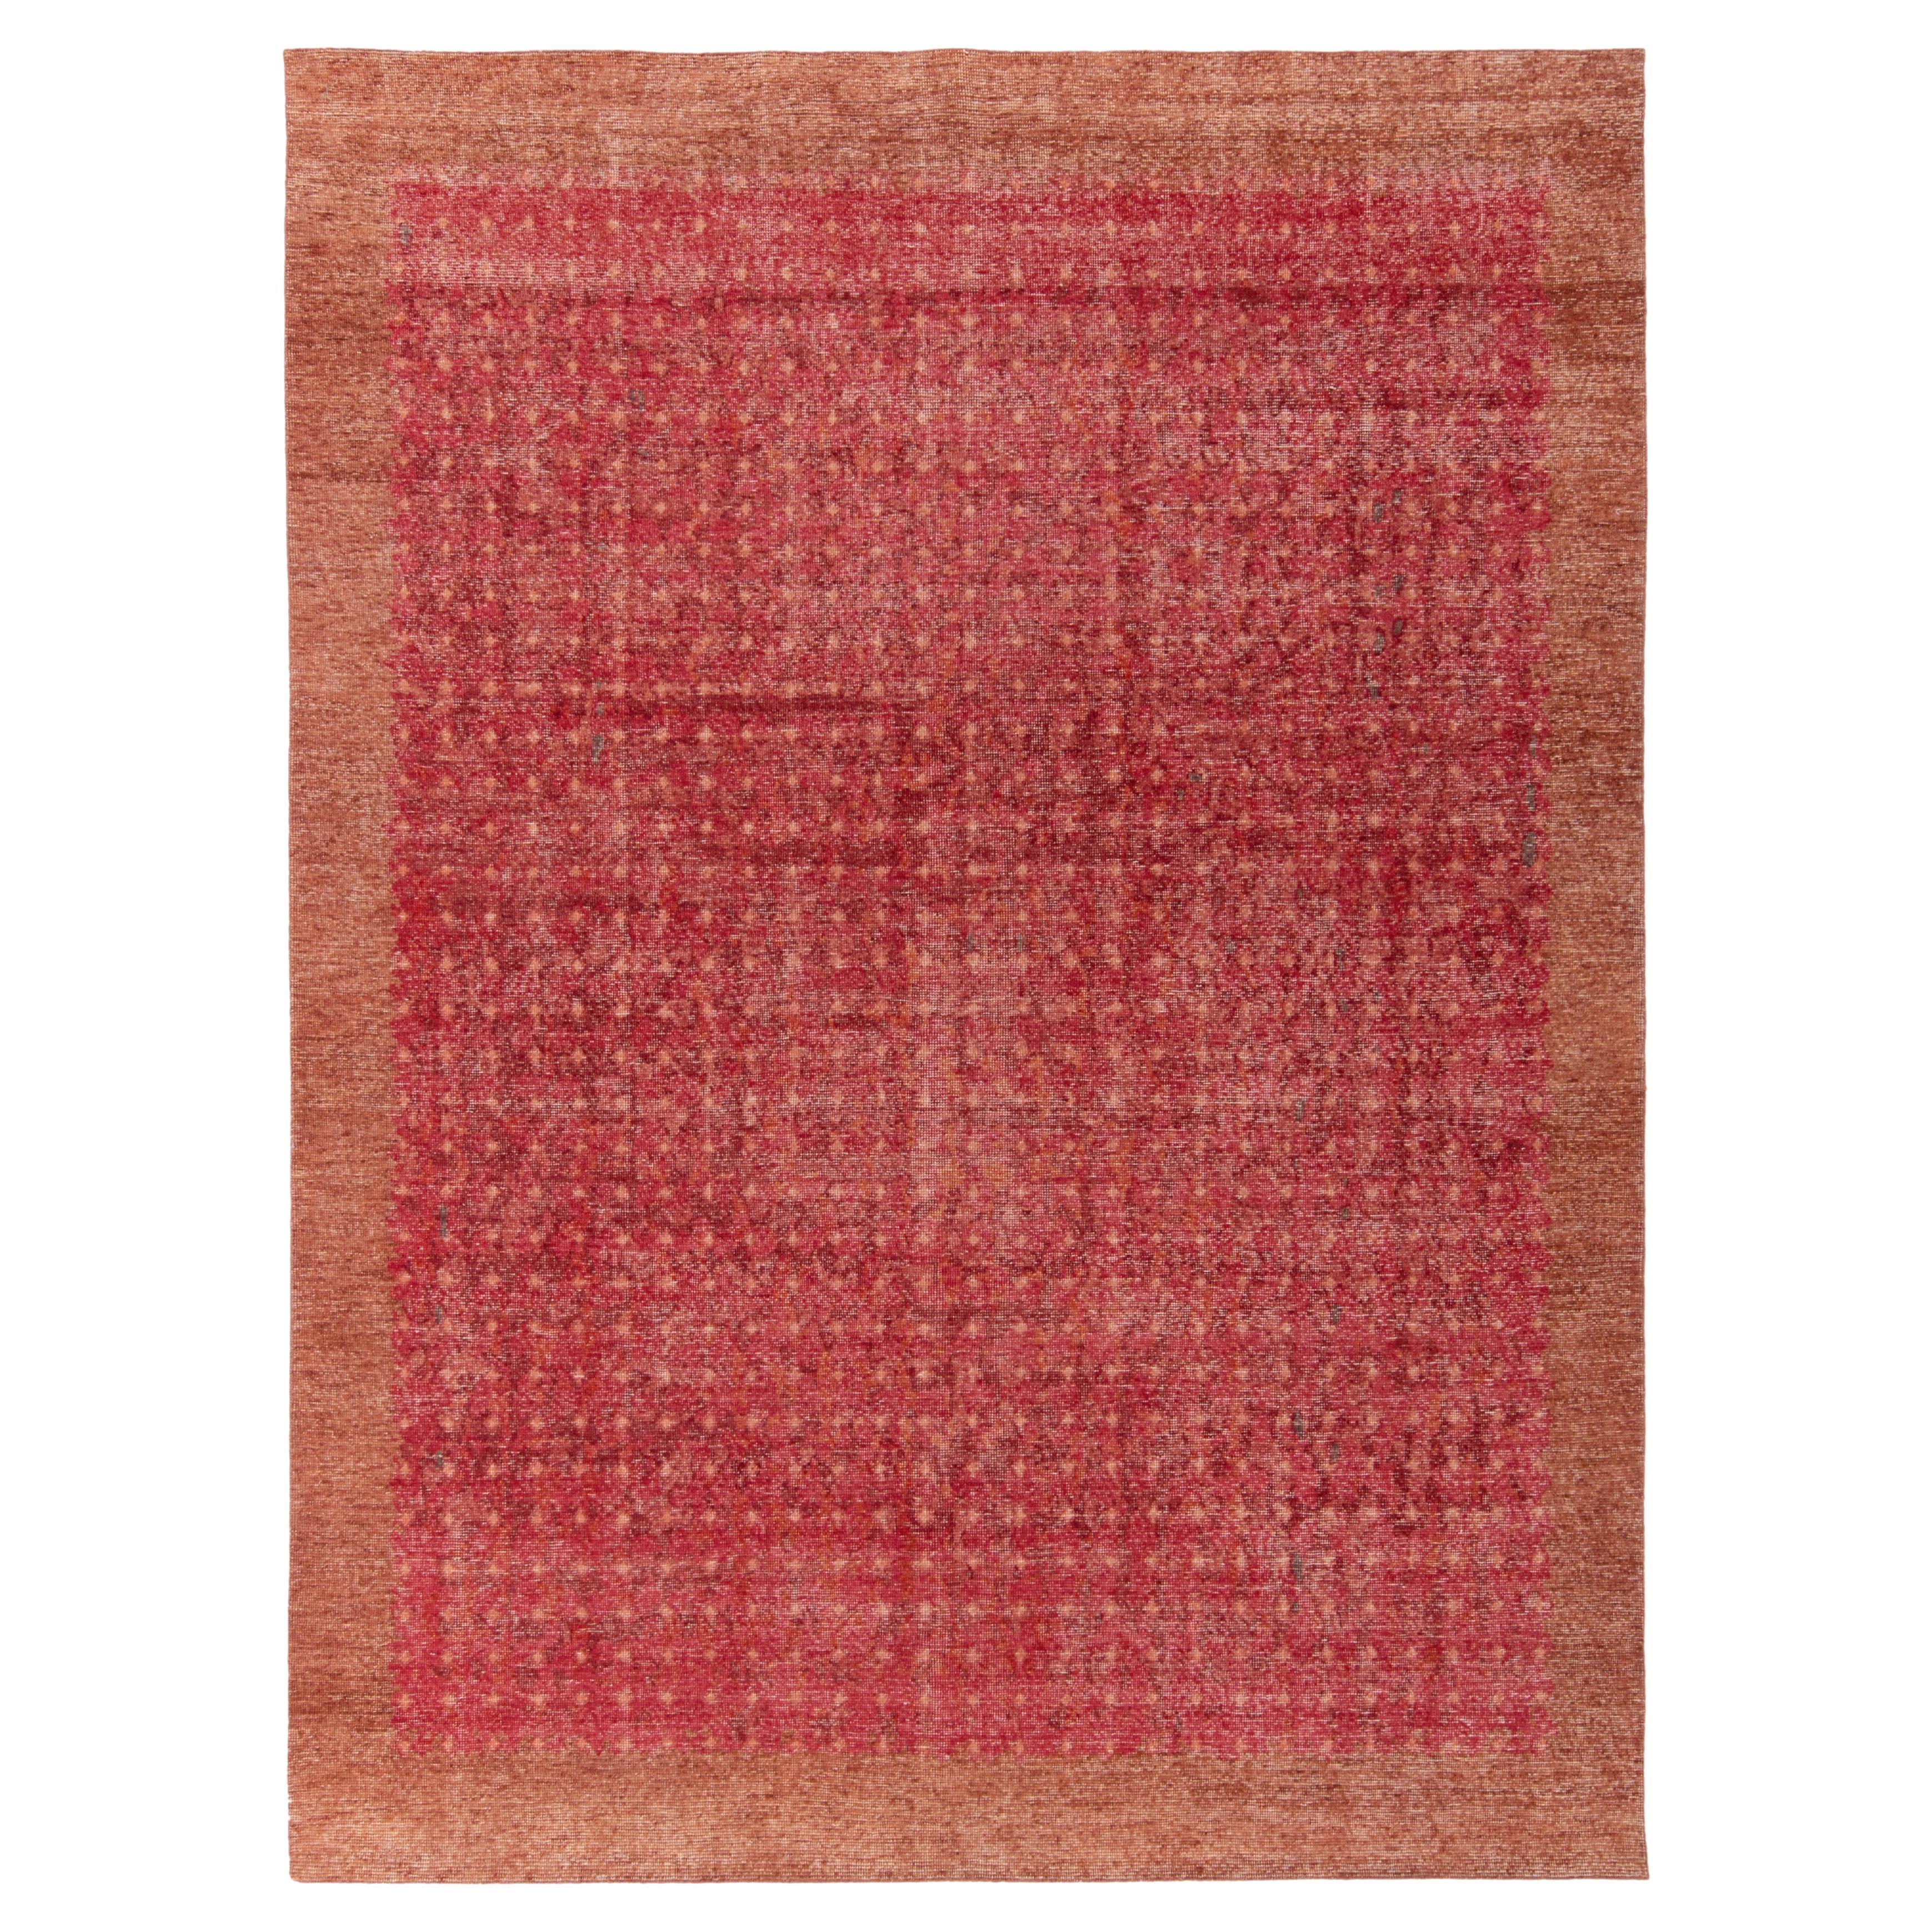 Rug & Kilim's Hand-Knotted Distressed Style Modern Rug in Red and Brown